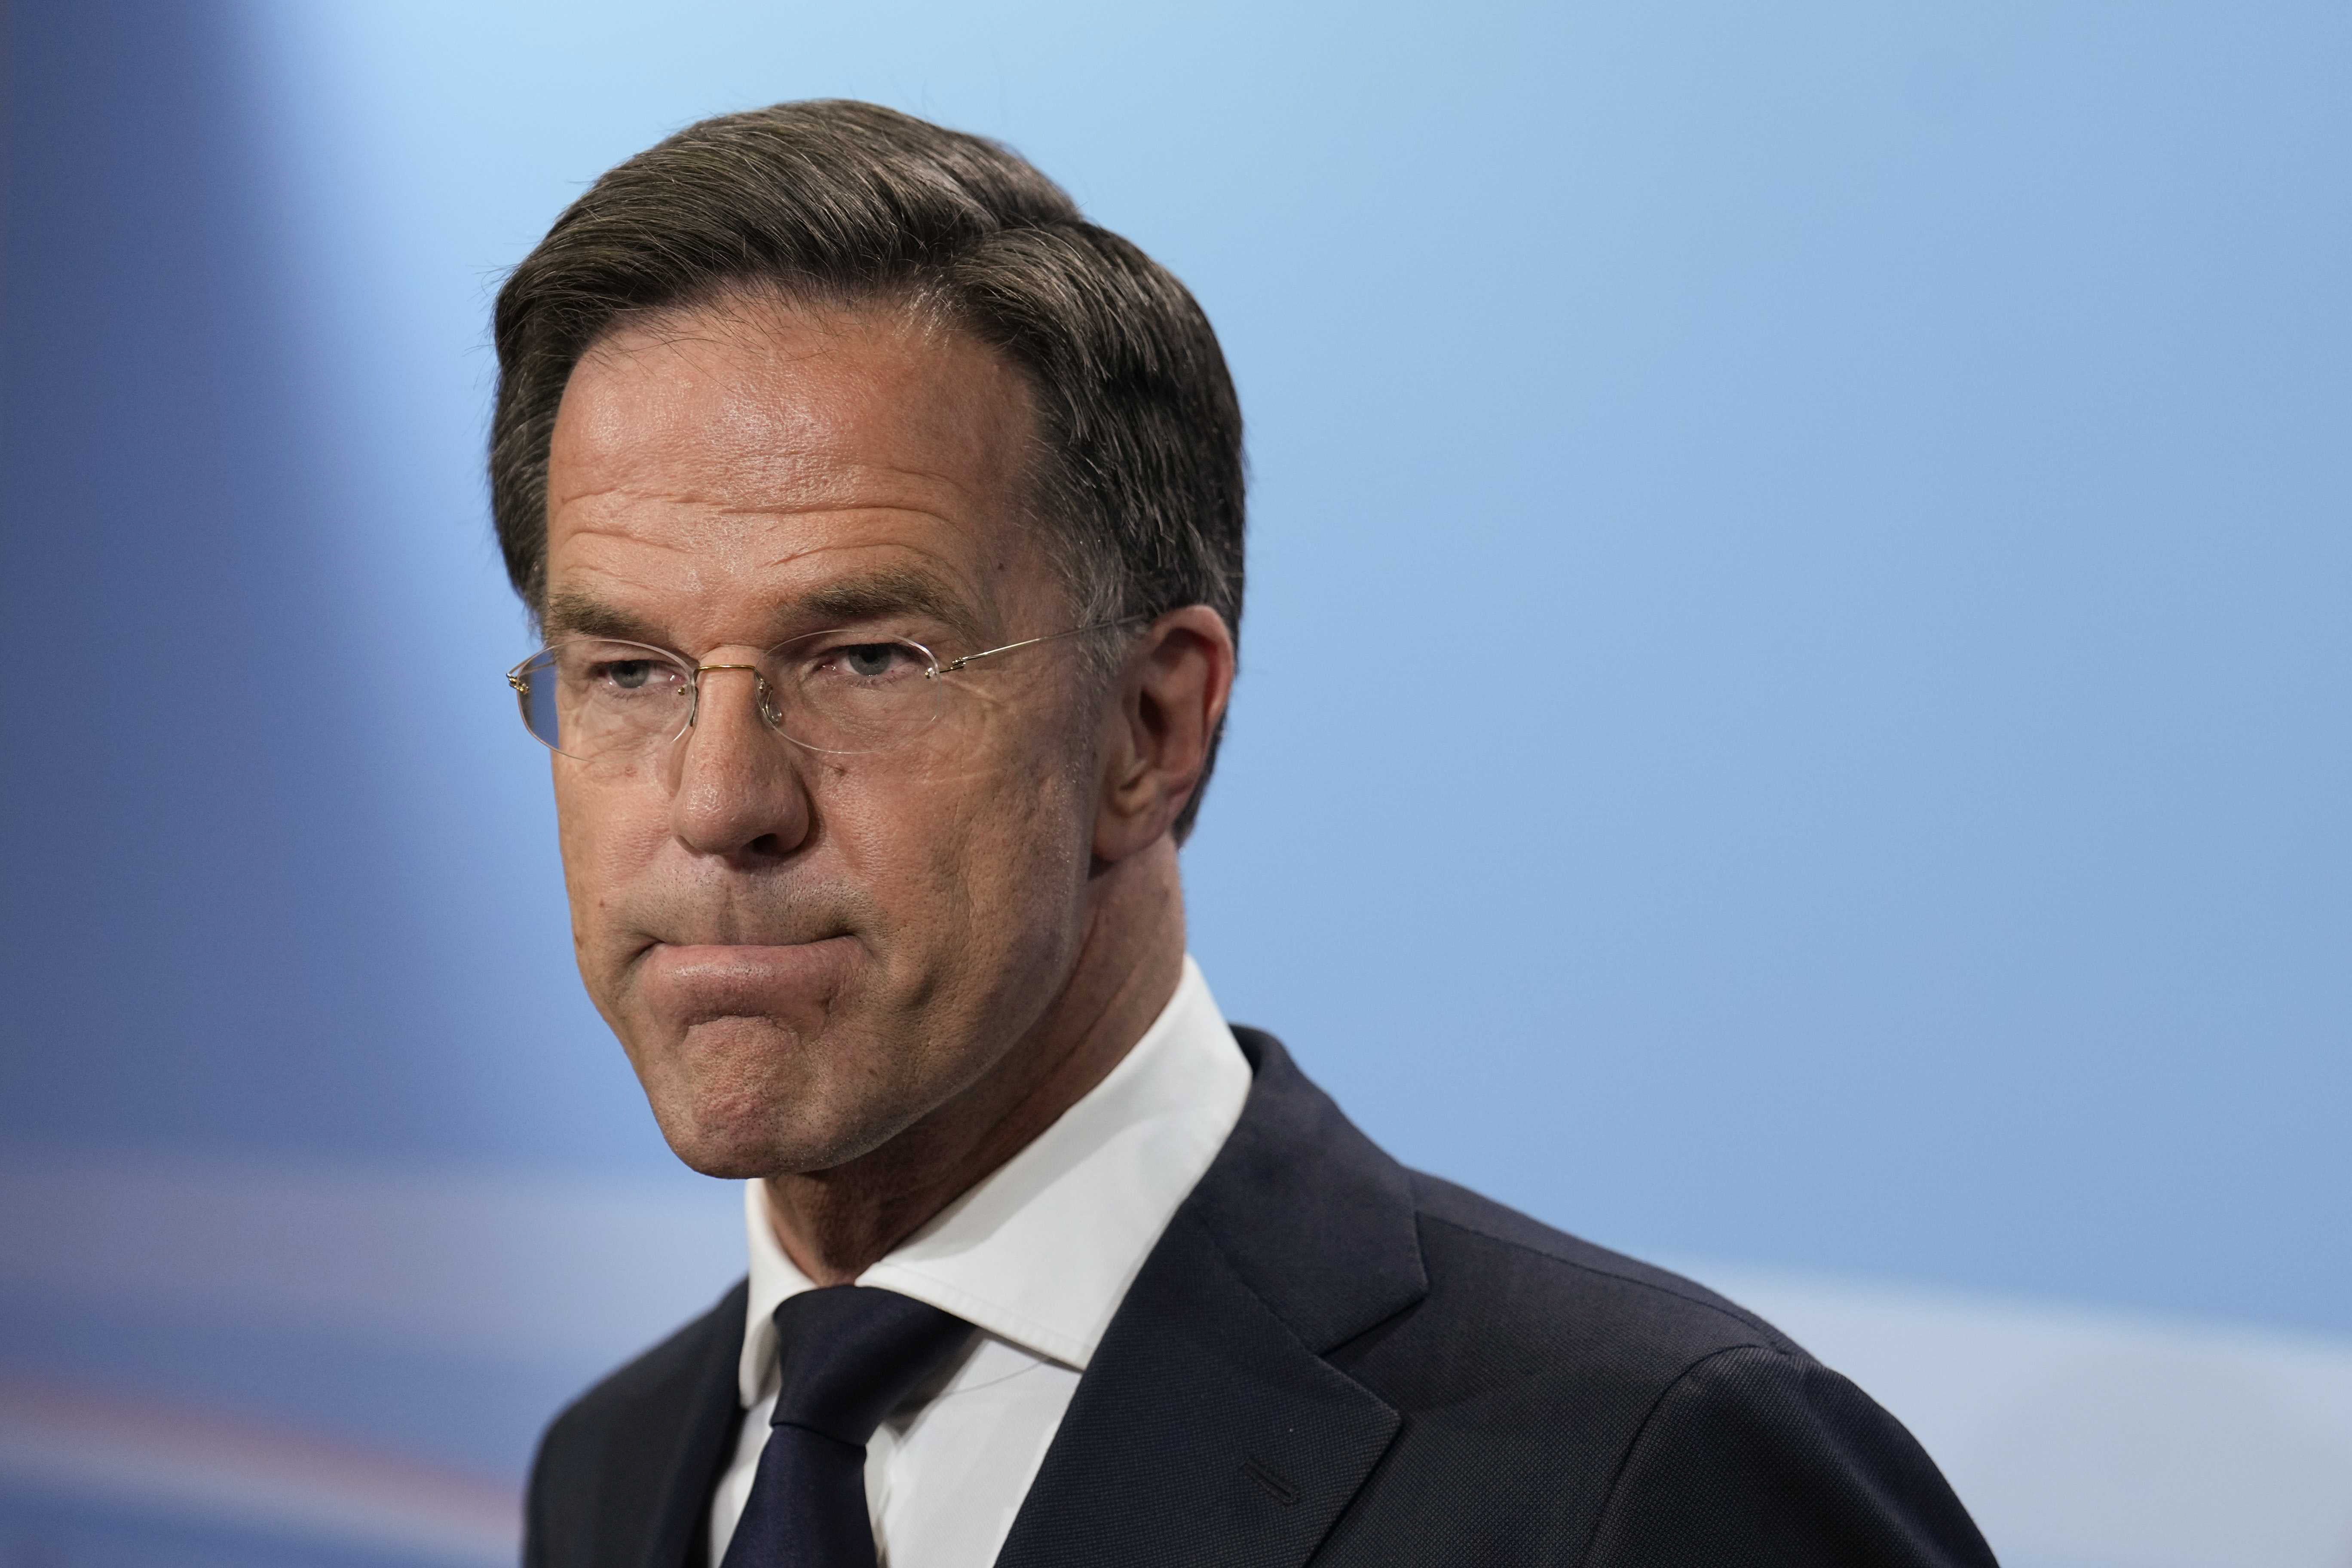 Teflon Mark Finally Comes Unstuck As Dutch Pm Says He Will Leave